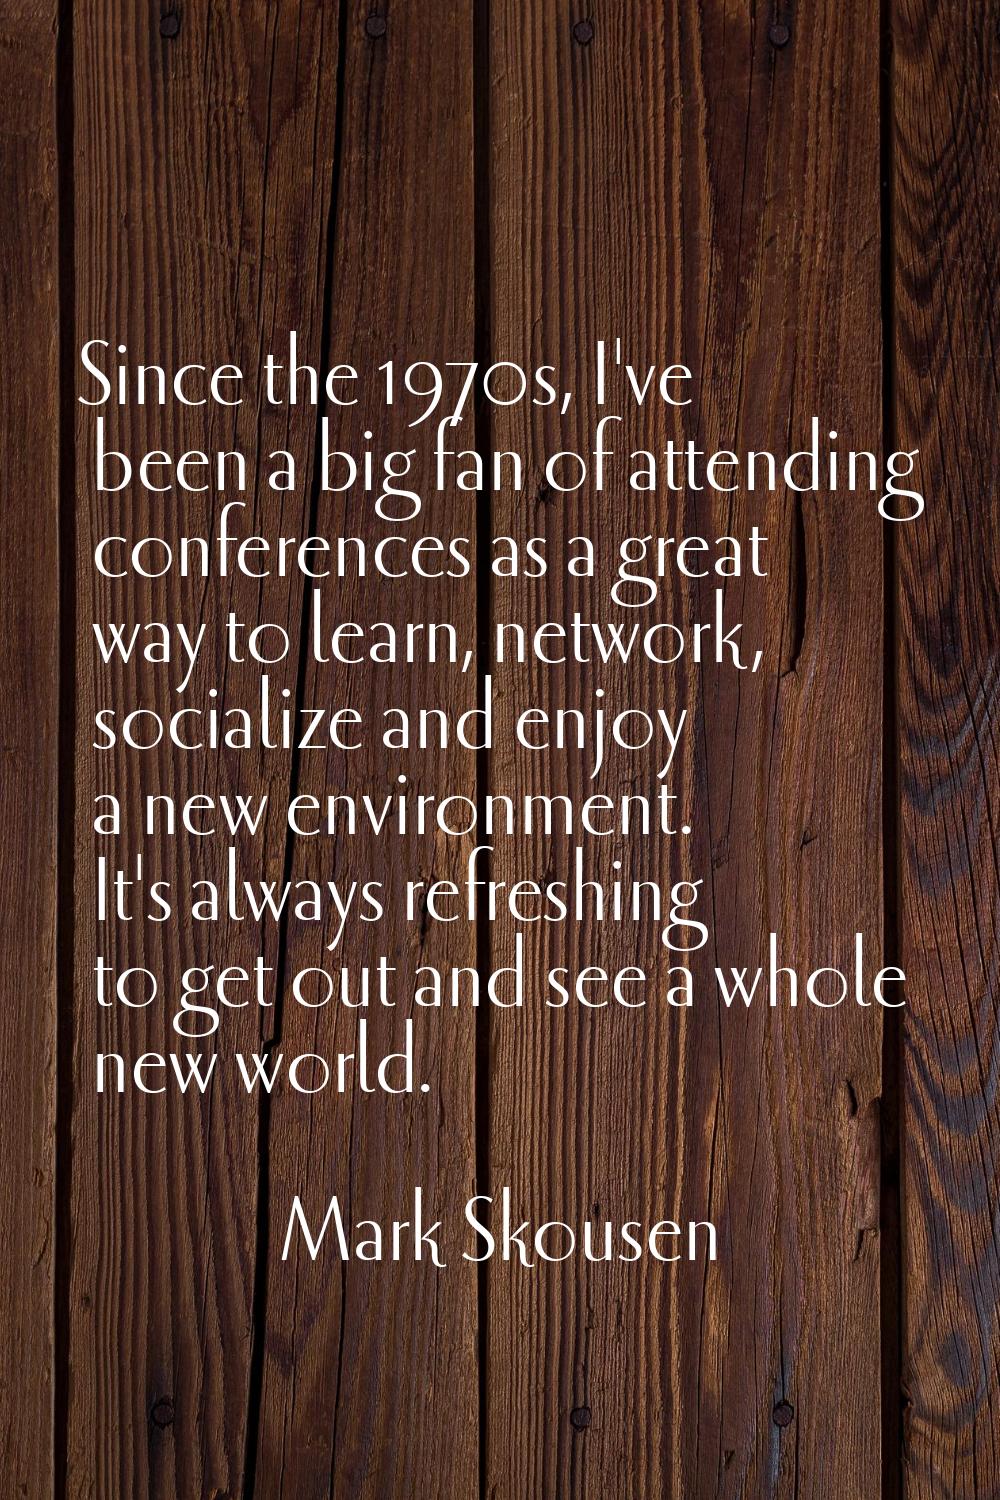 Since the 1970s, I've been a big fan of attending conferences as a great way to learn, network, soc